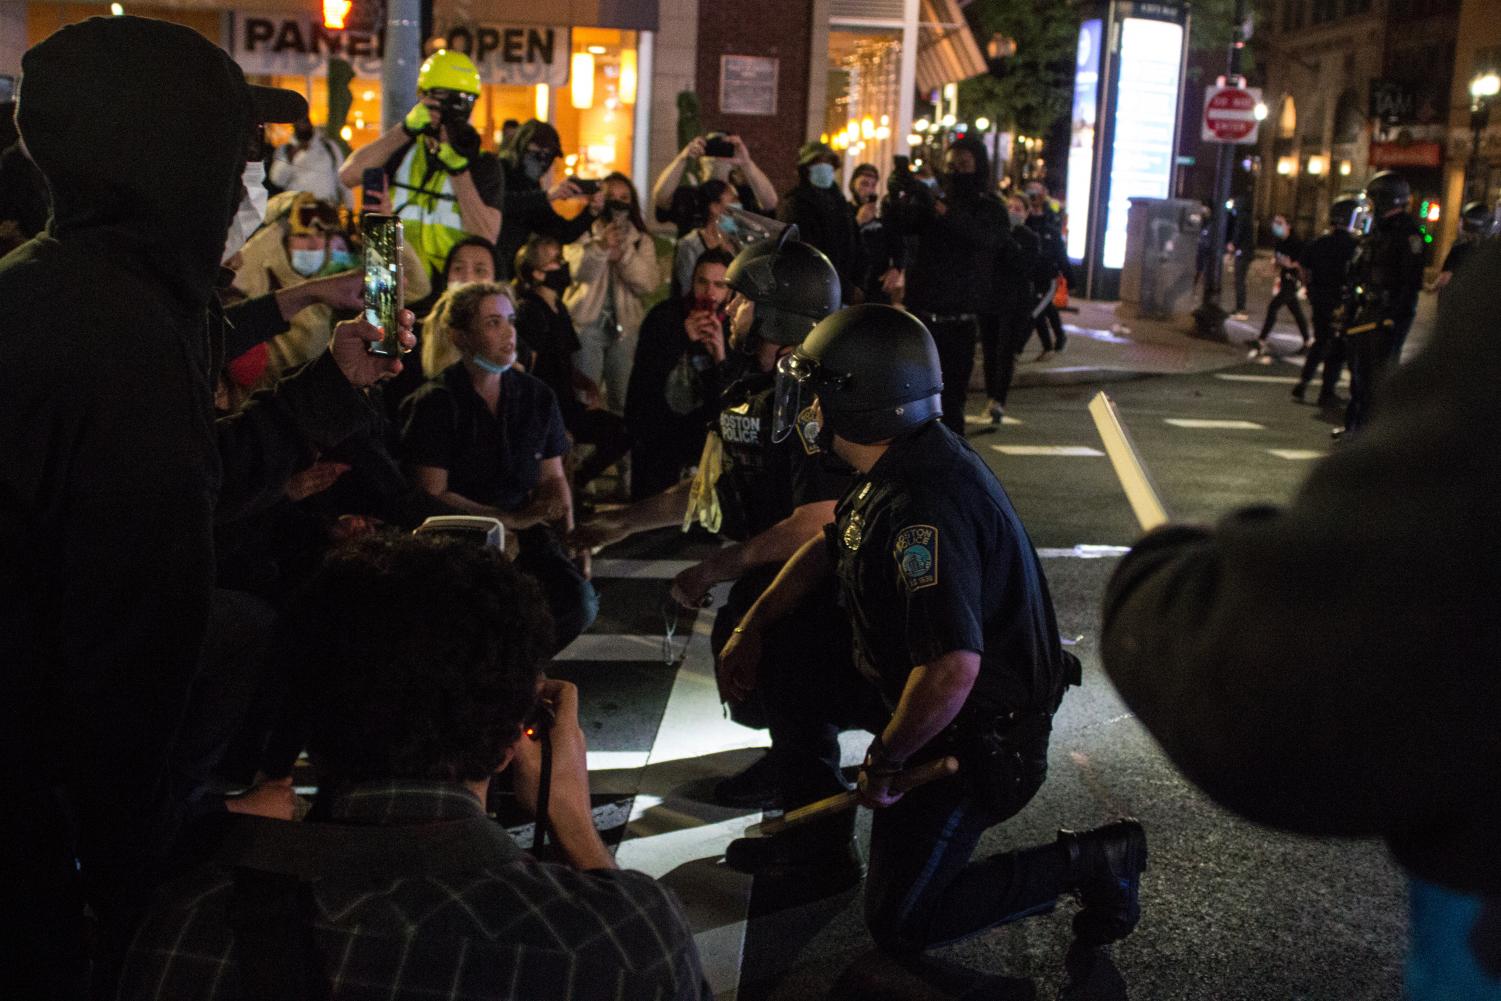 Violence+erupts+near+Boston+campus+as+police+and+protesters+clash